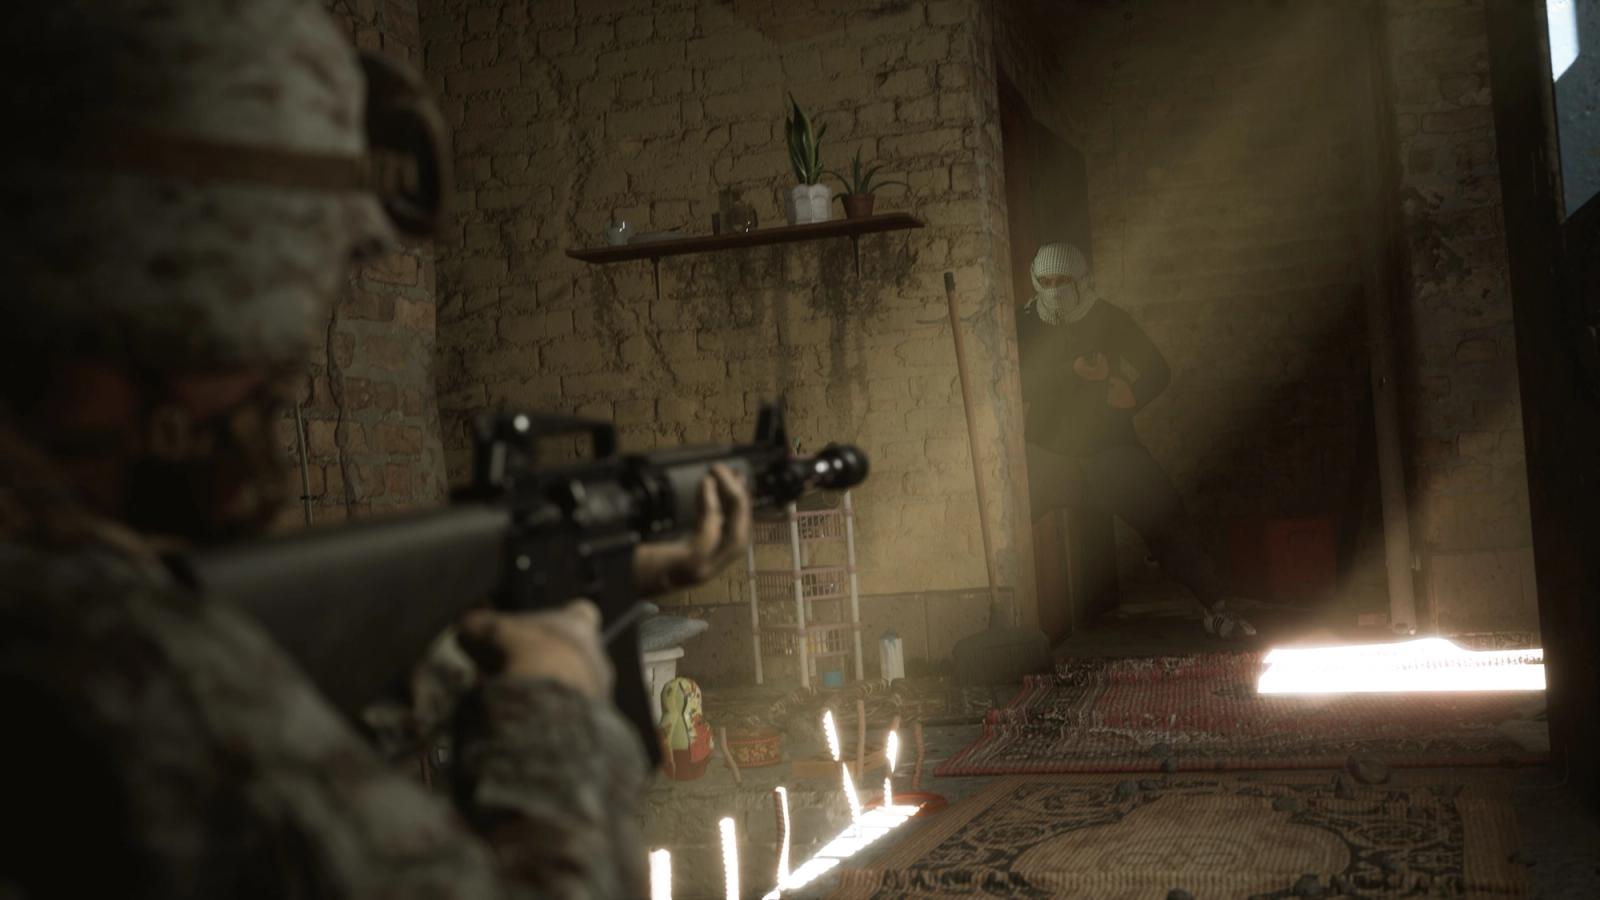 A screenshot from the video game Six Days in Fallujah. Inside a barely sunlit building, a U.S Marine can be seen pointing an M16 at an insurgent.